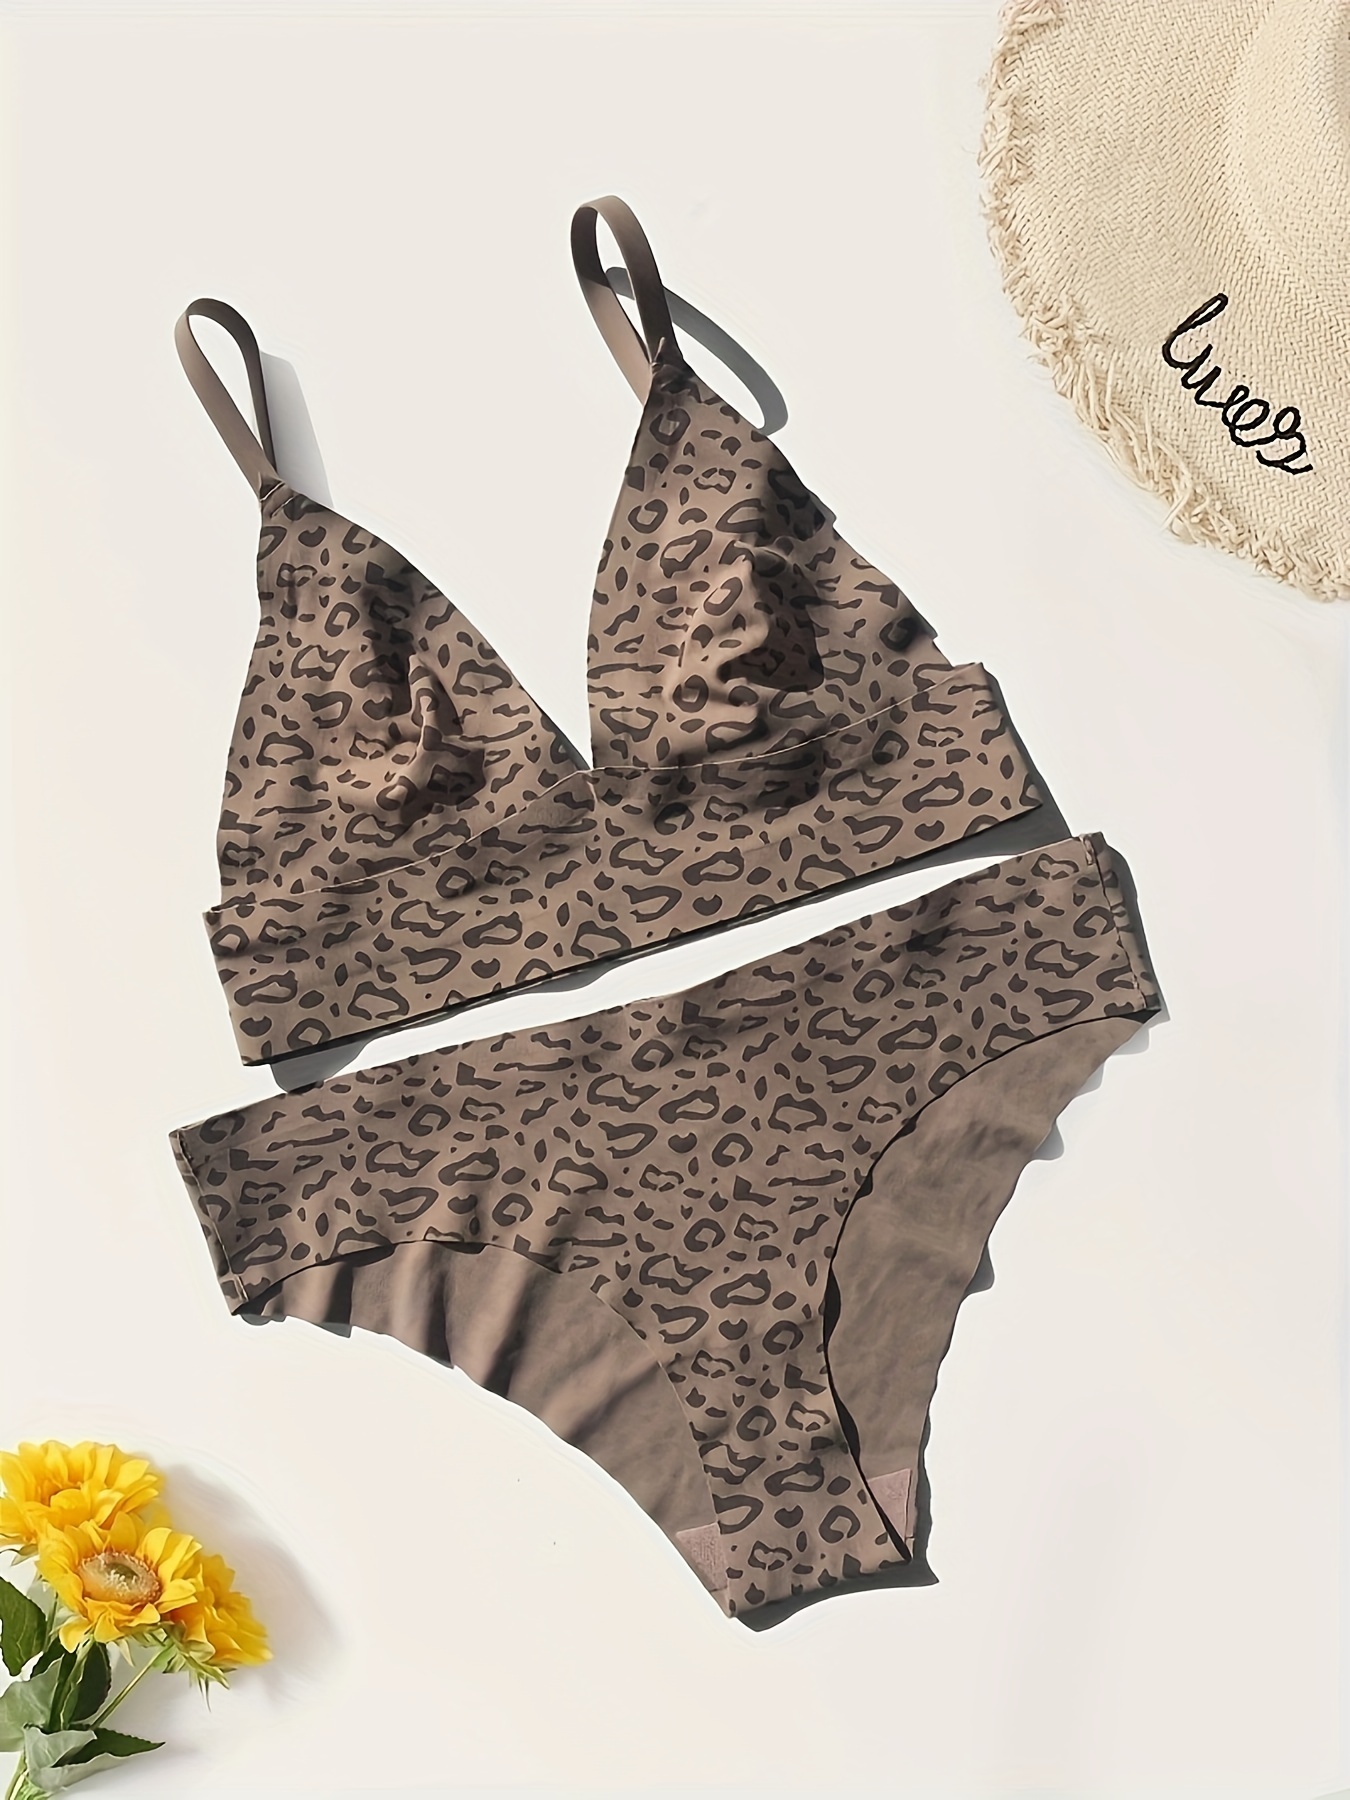 Womens Leopard Print Lace Push Up Bra And Panty Set Seamless T Back Thongs  Underwear Lingerie Set From Mengqiqi04, $5.47